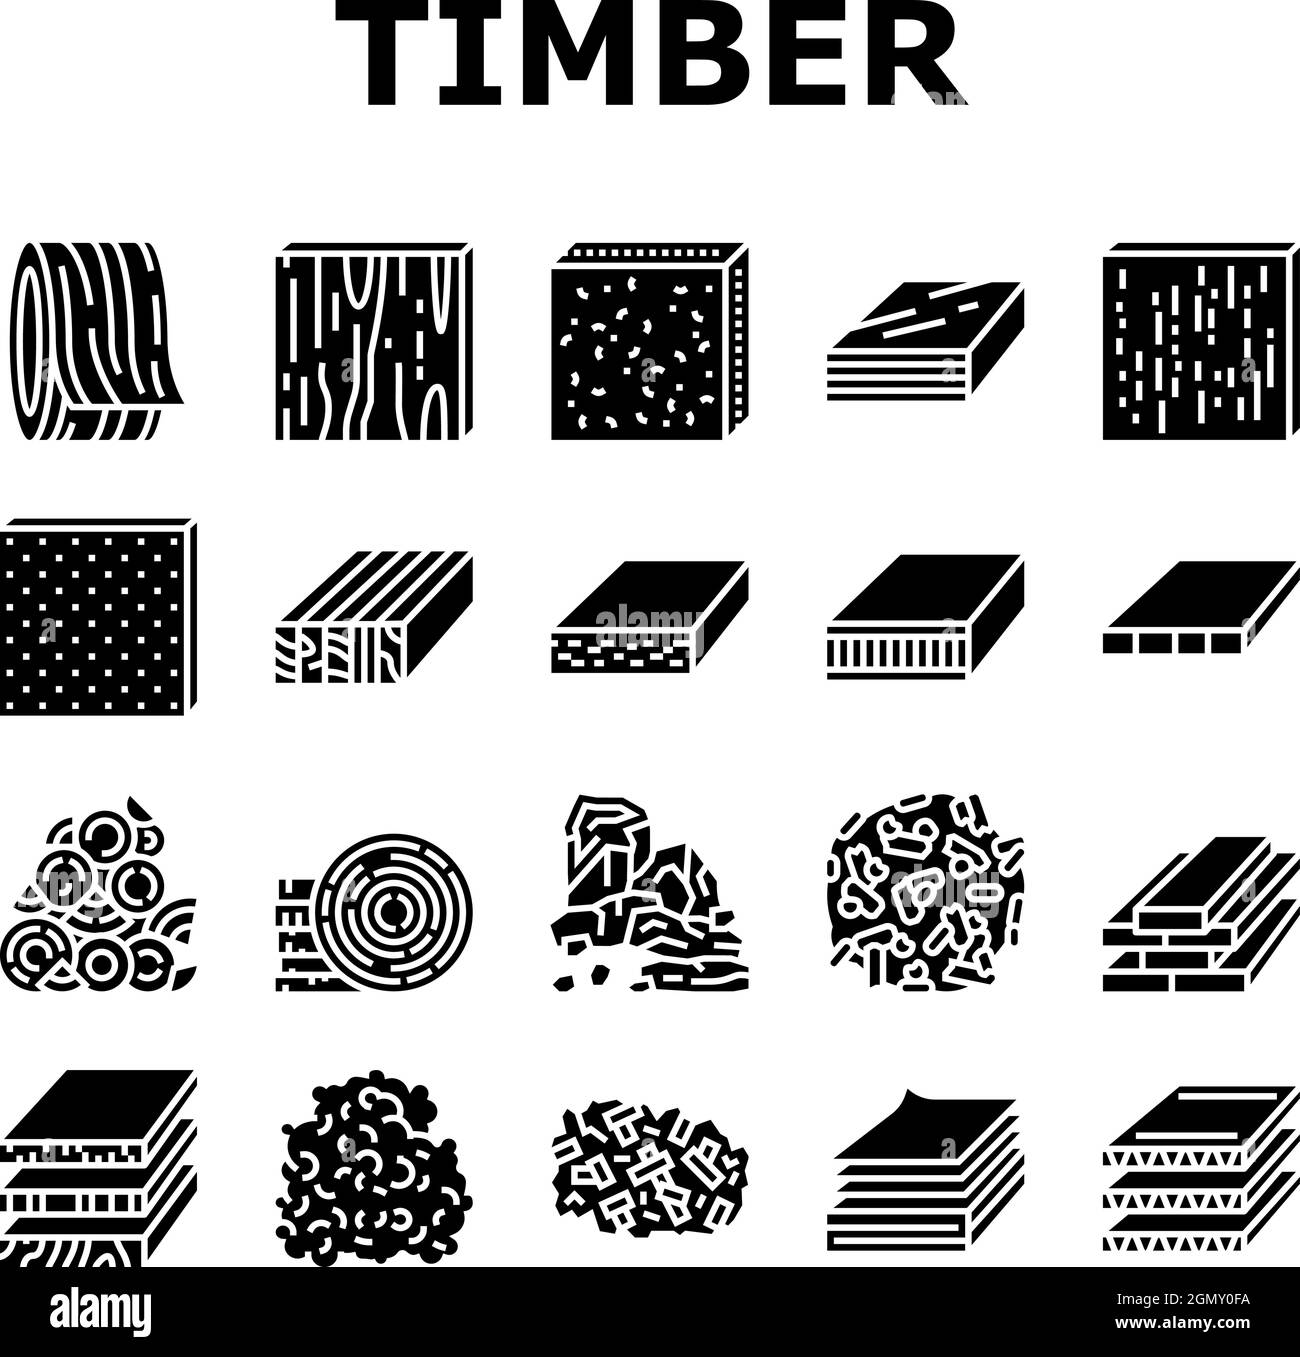 Timber Wood Industrial Production Icons Set Vector Stock Vector